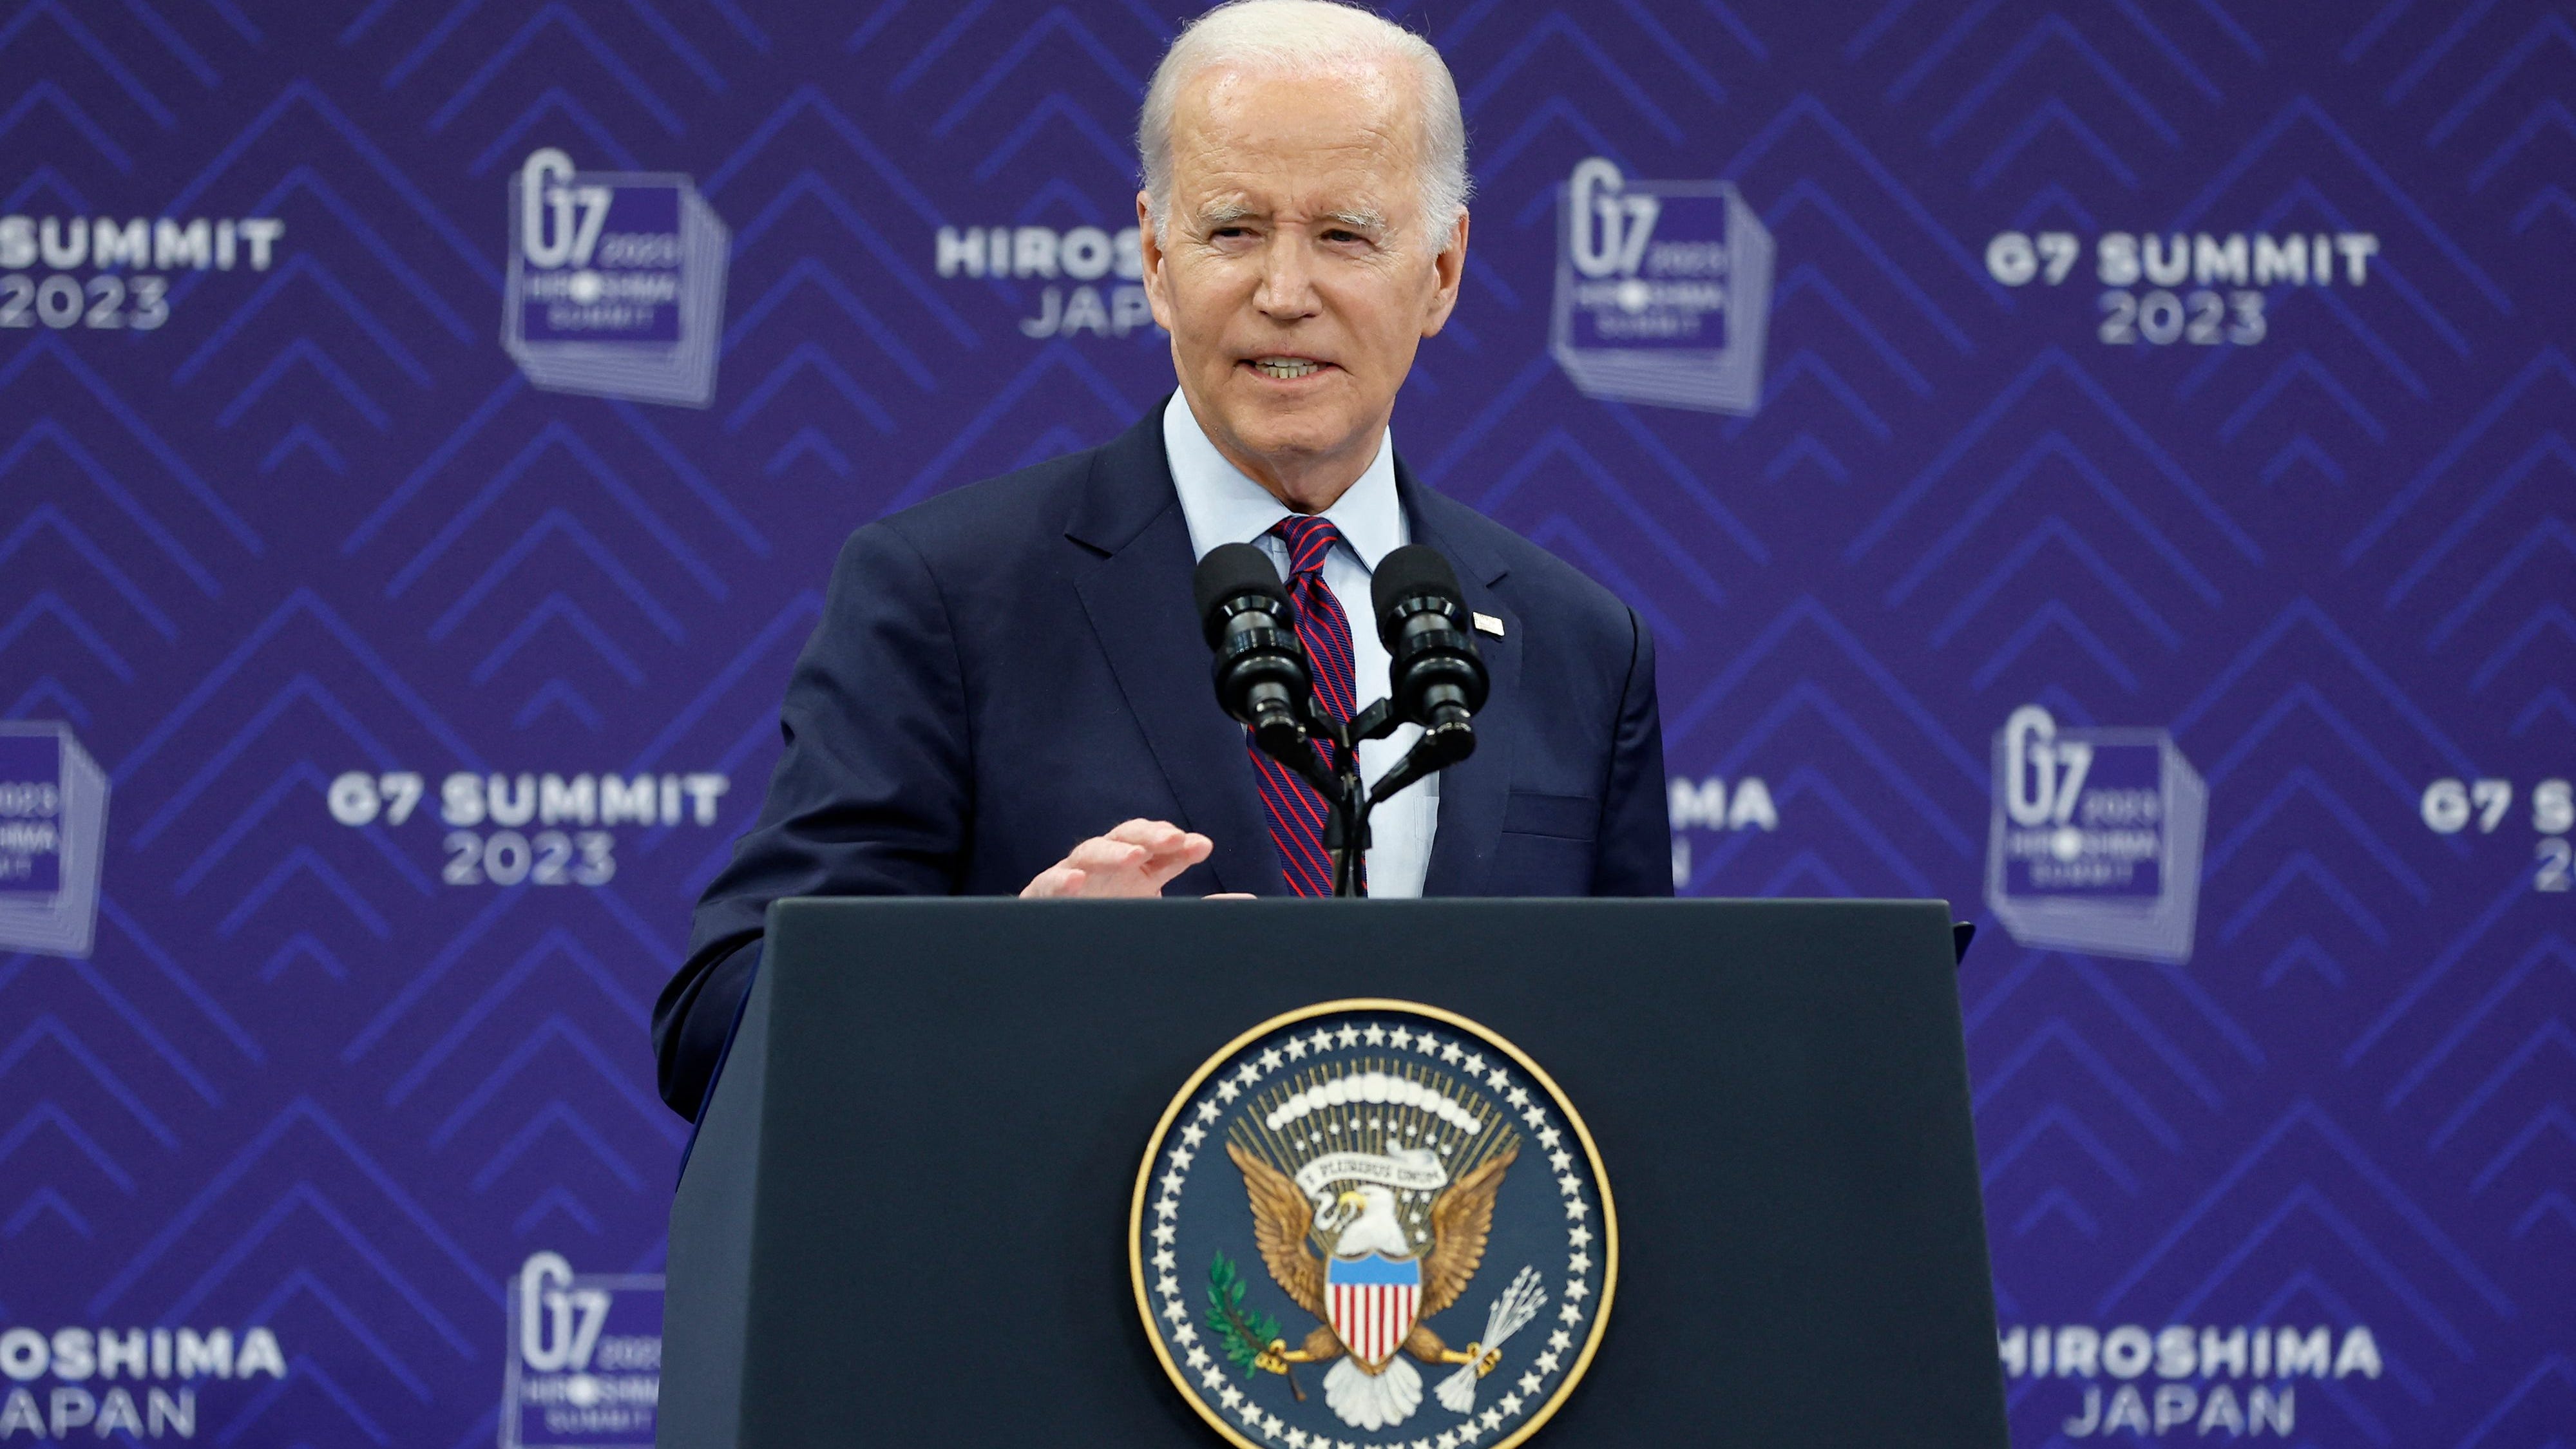 US President Joe Biden speaks during a press conference following the G7 Leaders' Summit in Hiroshima on May 21, 2023. (Photo by Kiyoshi Ota / POOL / AFP) (Photo by KIYOSHI OTA/POOL/AFP via Getty Images) ORIG FILE ID: AFP_33FQ8PX.jpg